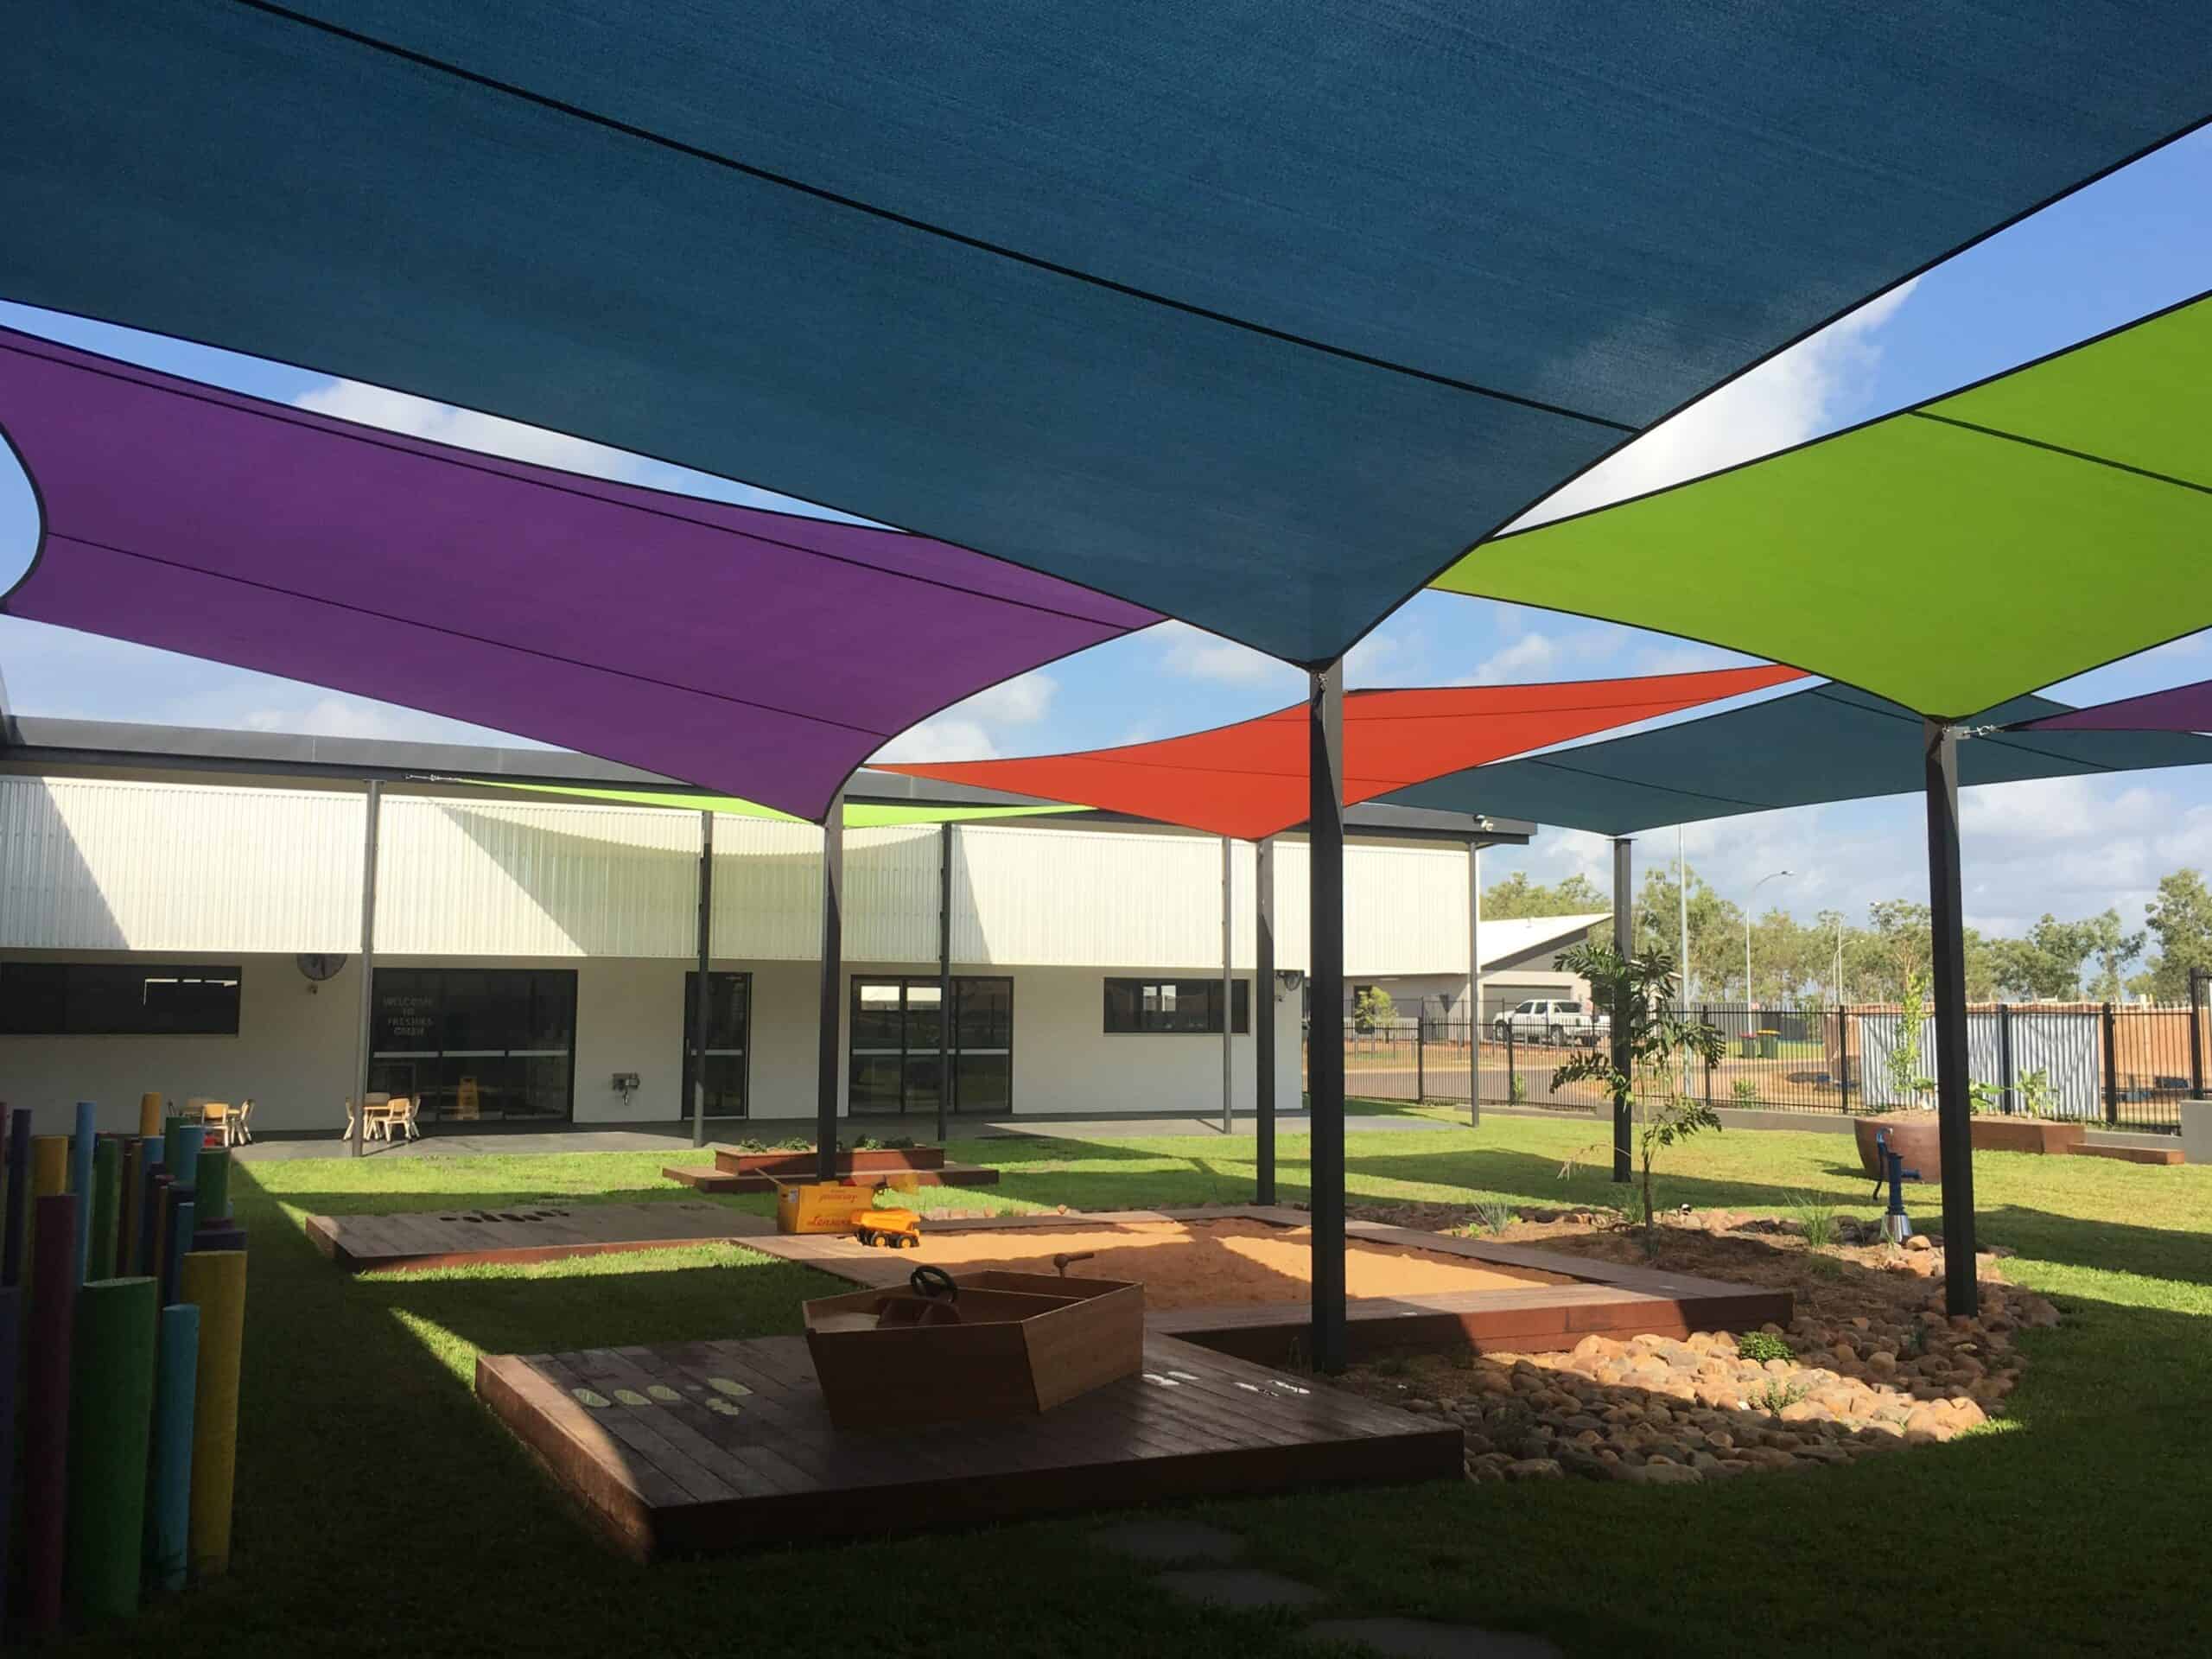 multicoloured overhead covers of an outdoor area